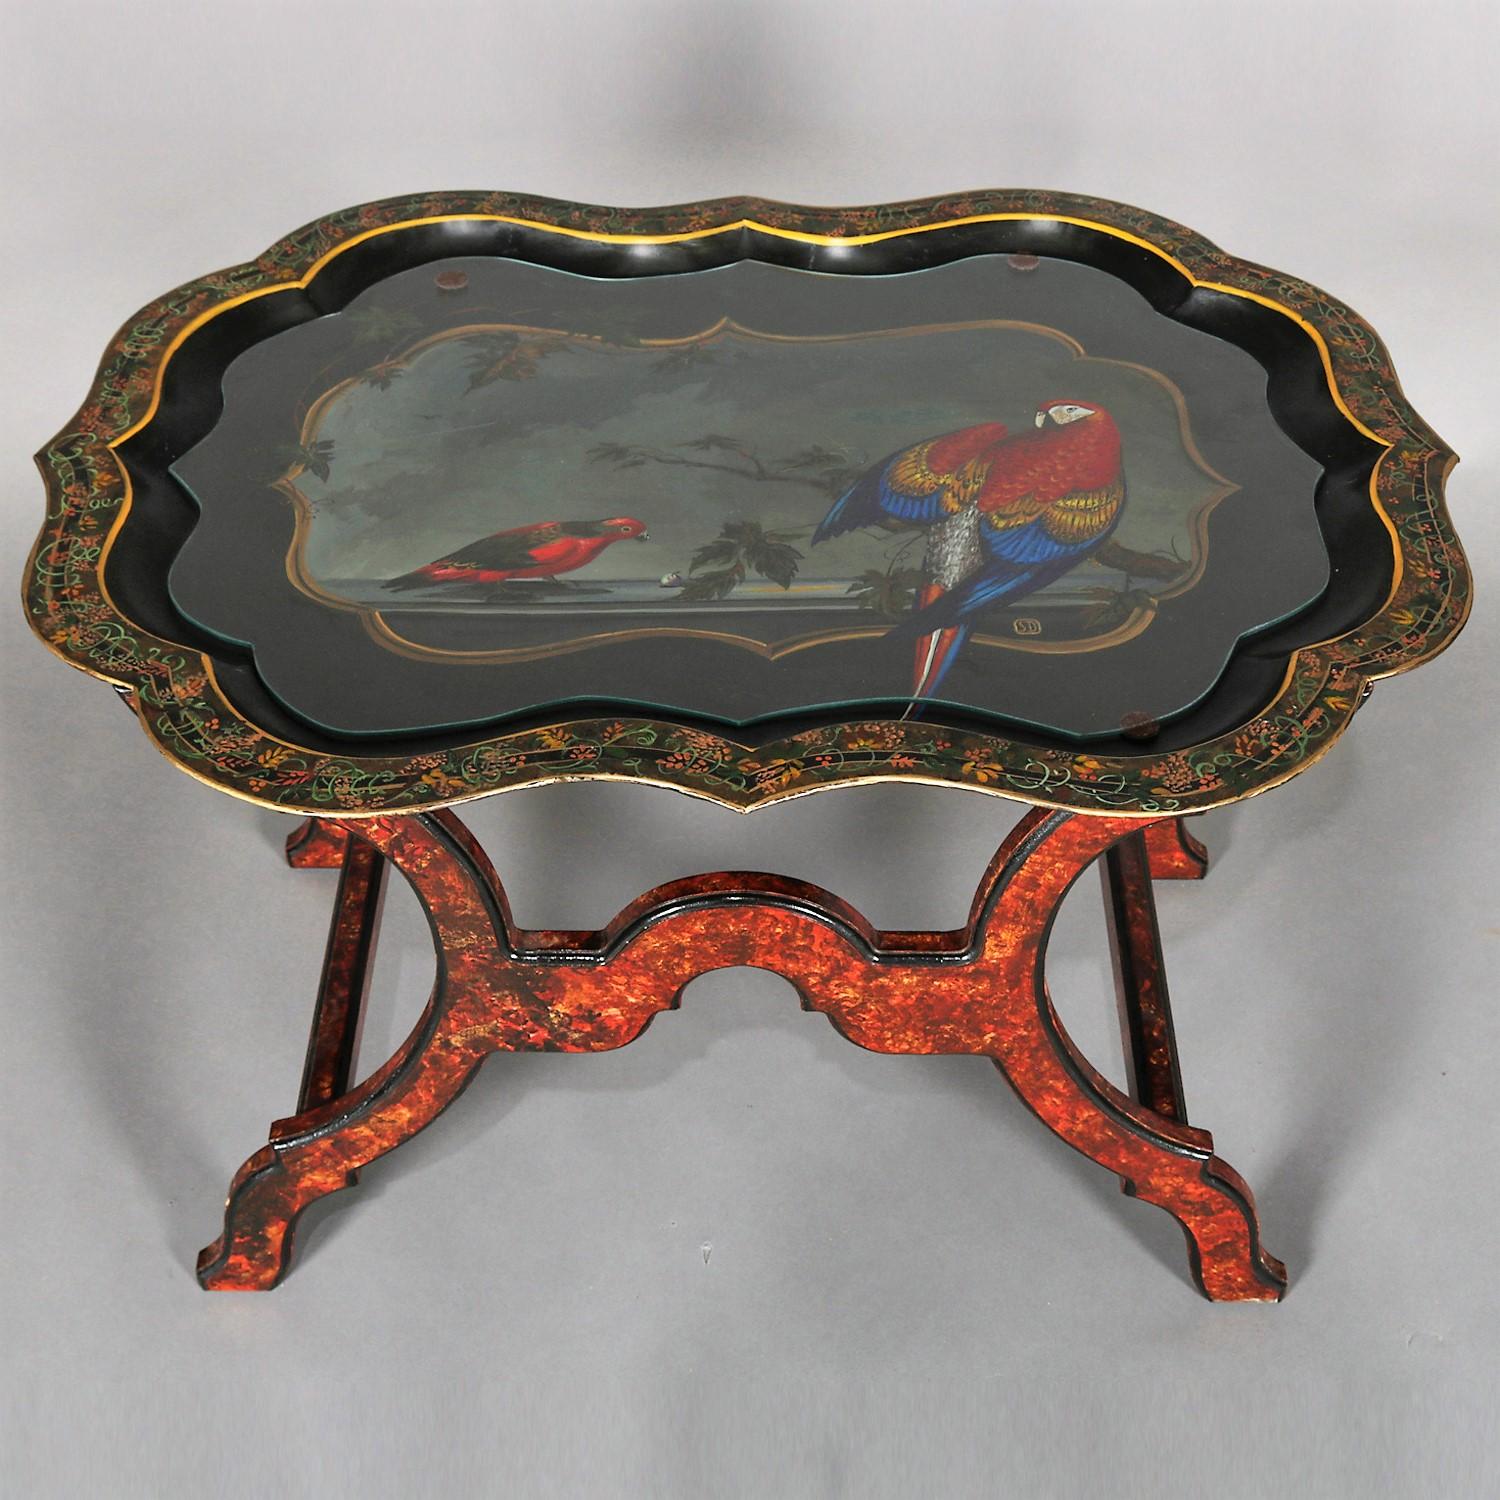 Vintage table features ebonized and gilt toleware metal tray having hand painted island scene with tropical birds (parrot and macaw) on beach with ocean and palm trees surrounded by scalloped border with foliate design and Artist-signed SD, seated